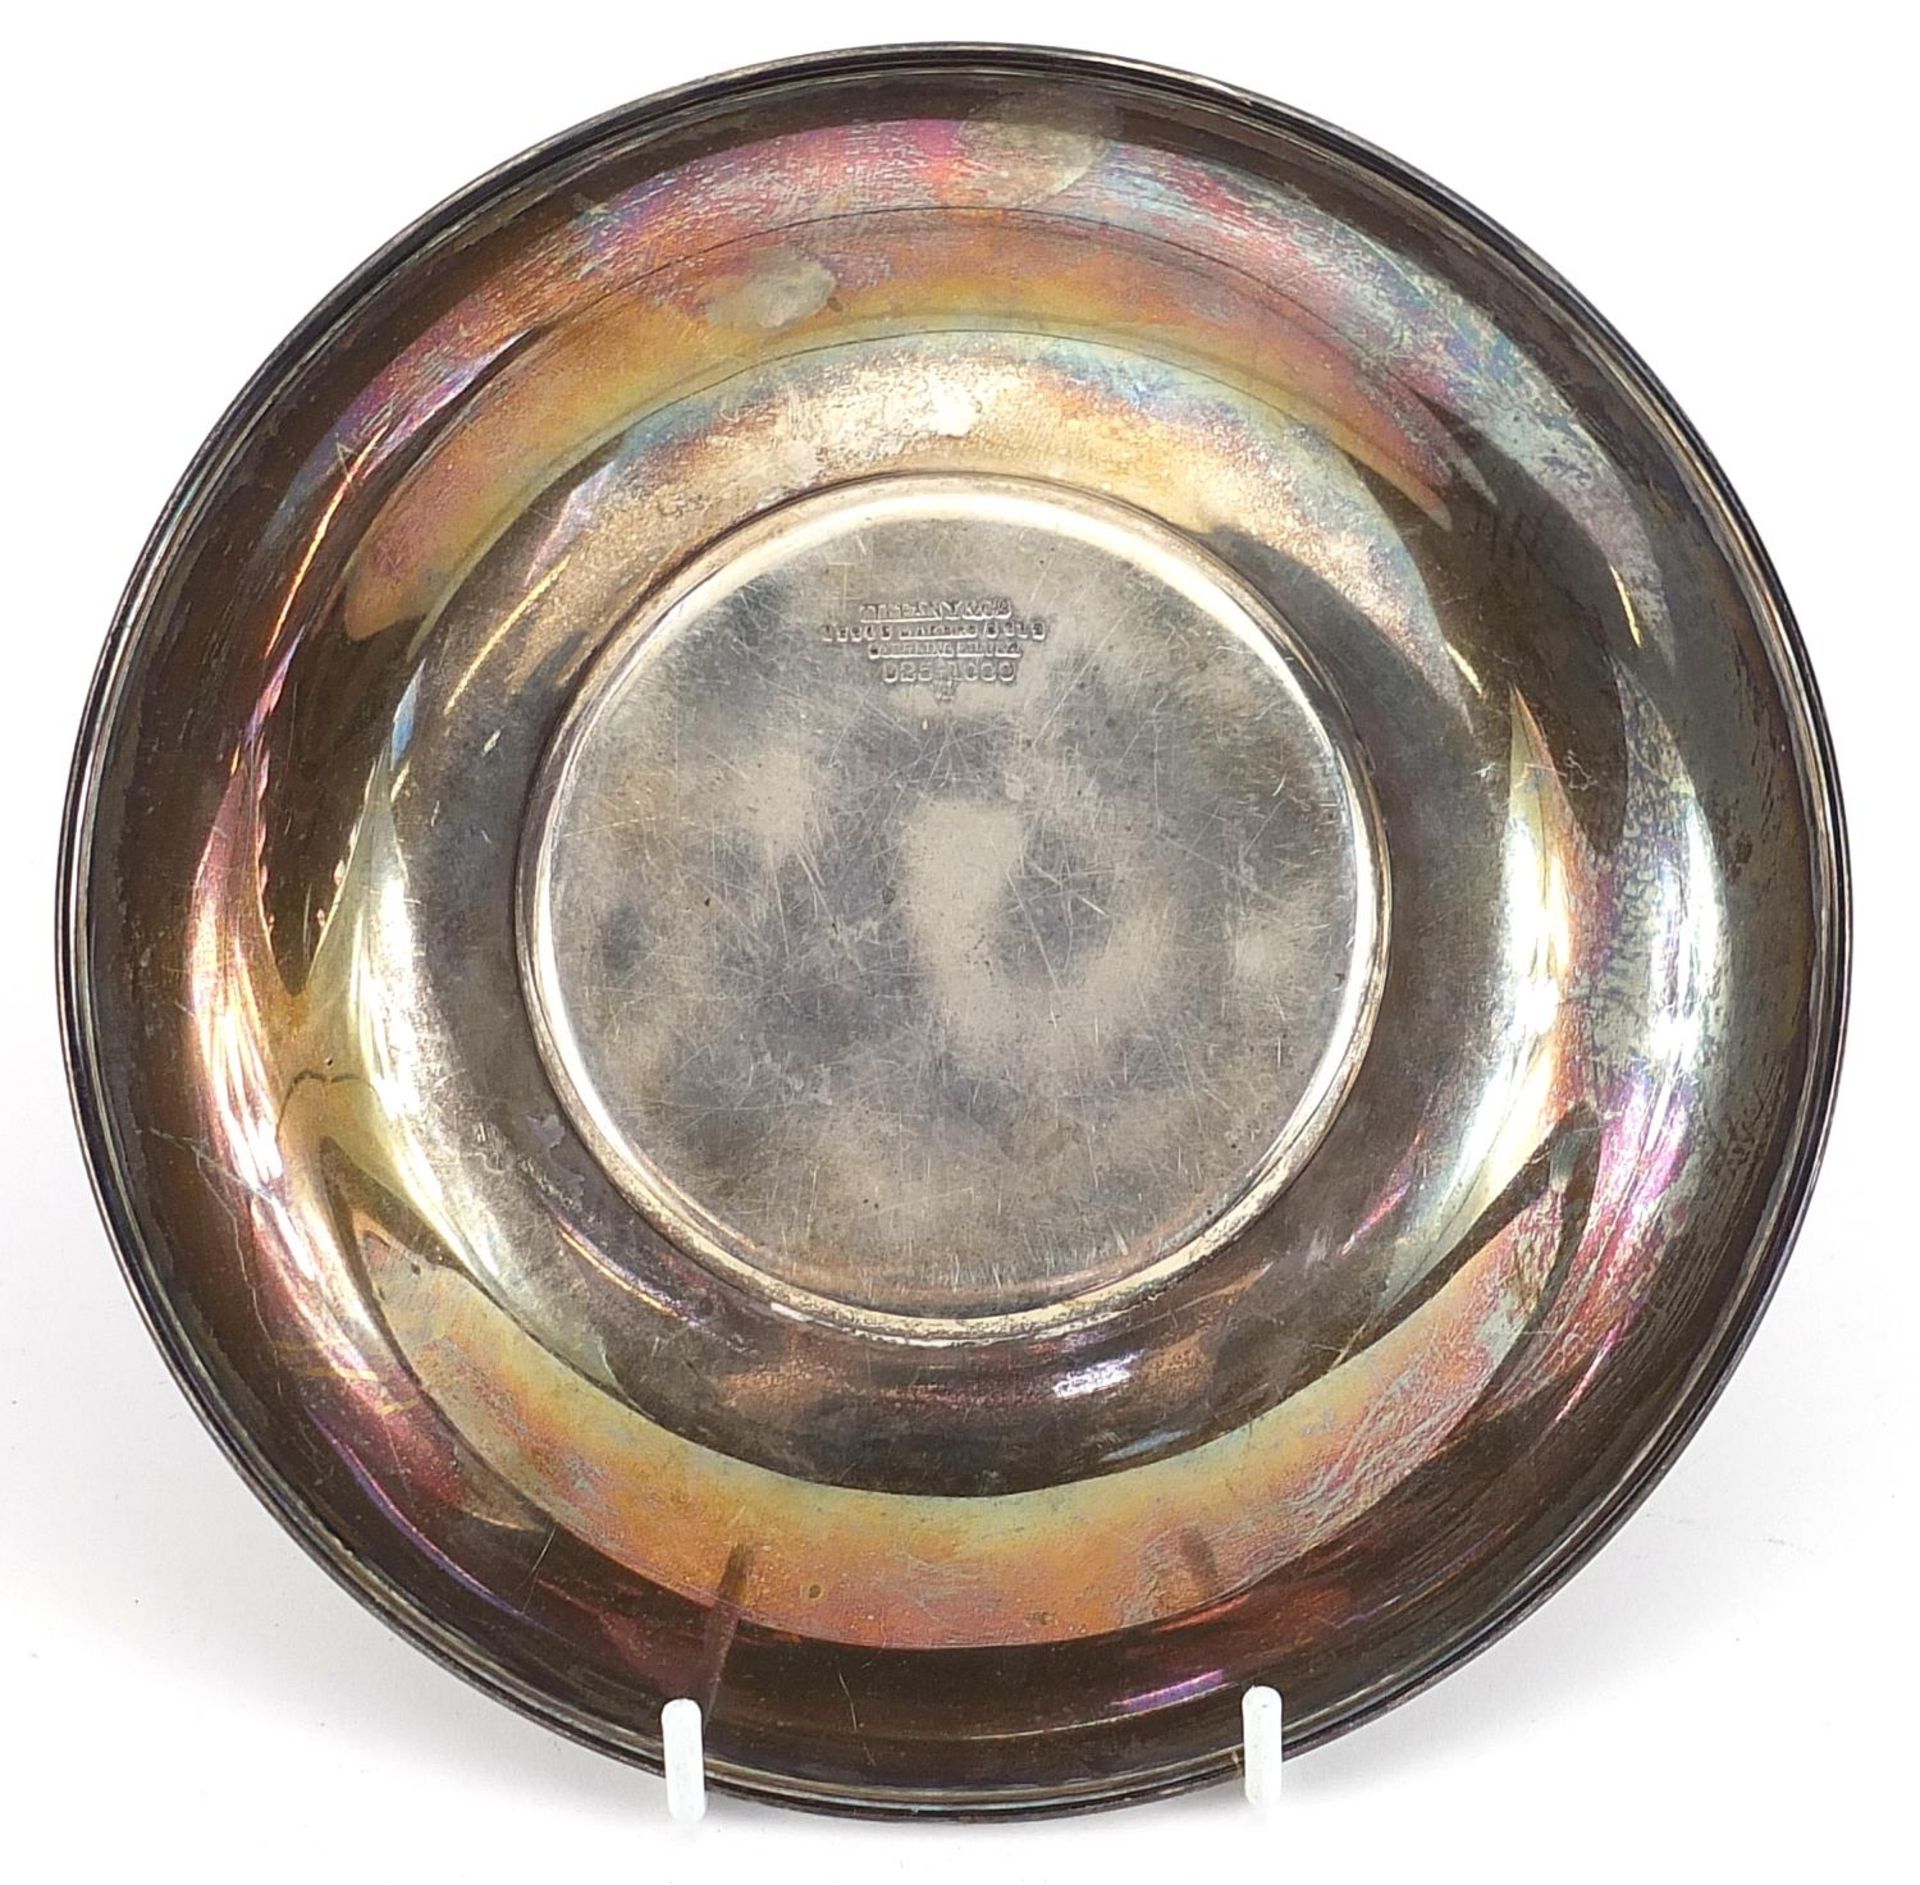 Tiffany & Co, circular sterling silver dish, 16cm in diameter, 162.0g - Image 2 of 3